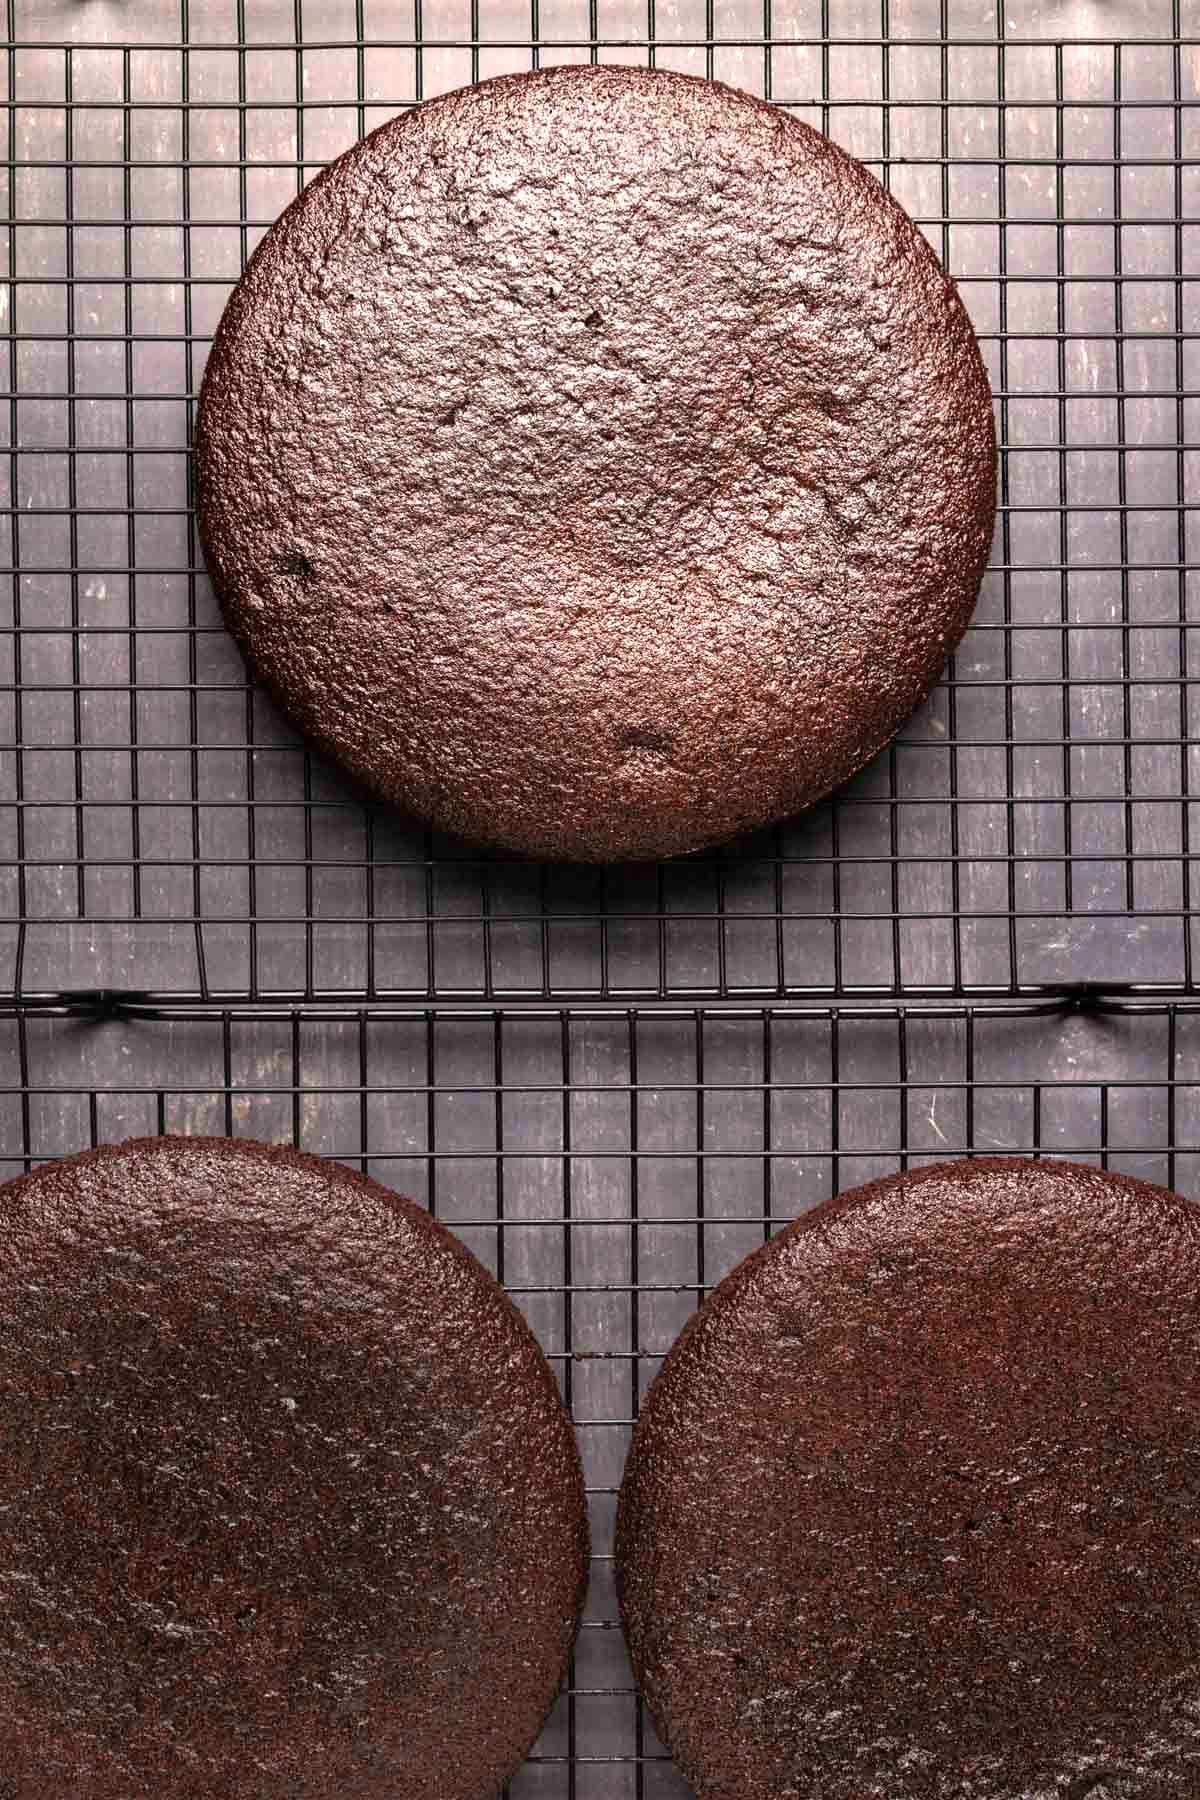 Chocolate cake layers on a wire cooling rack.